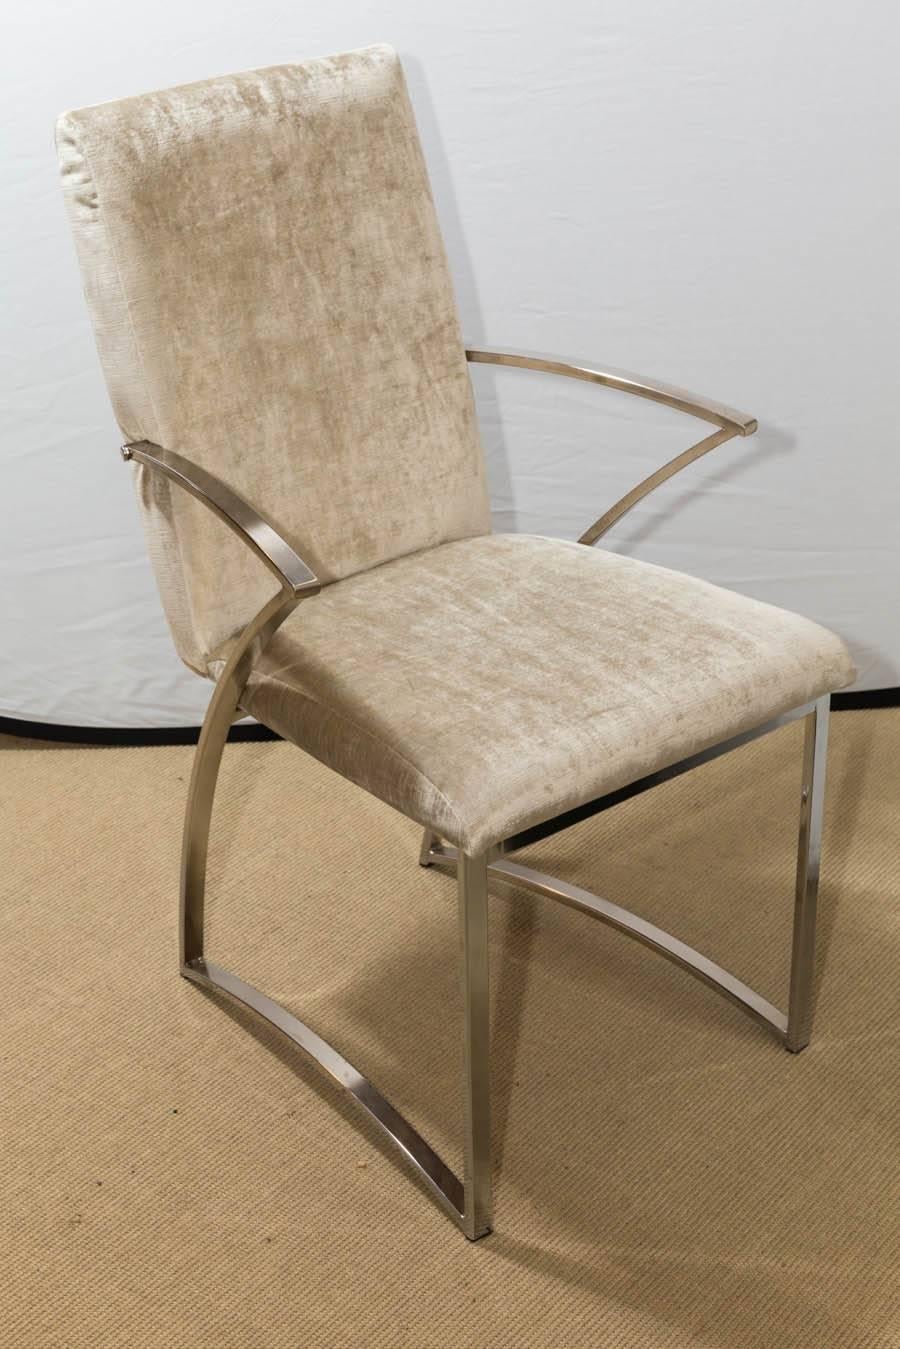 Set of Four Mid-Century Milo Baughman Style Chrome Dining Chairs For Sale 2